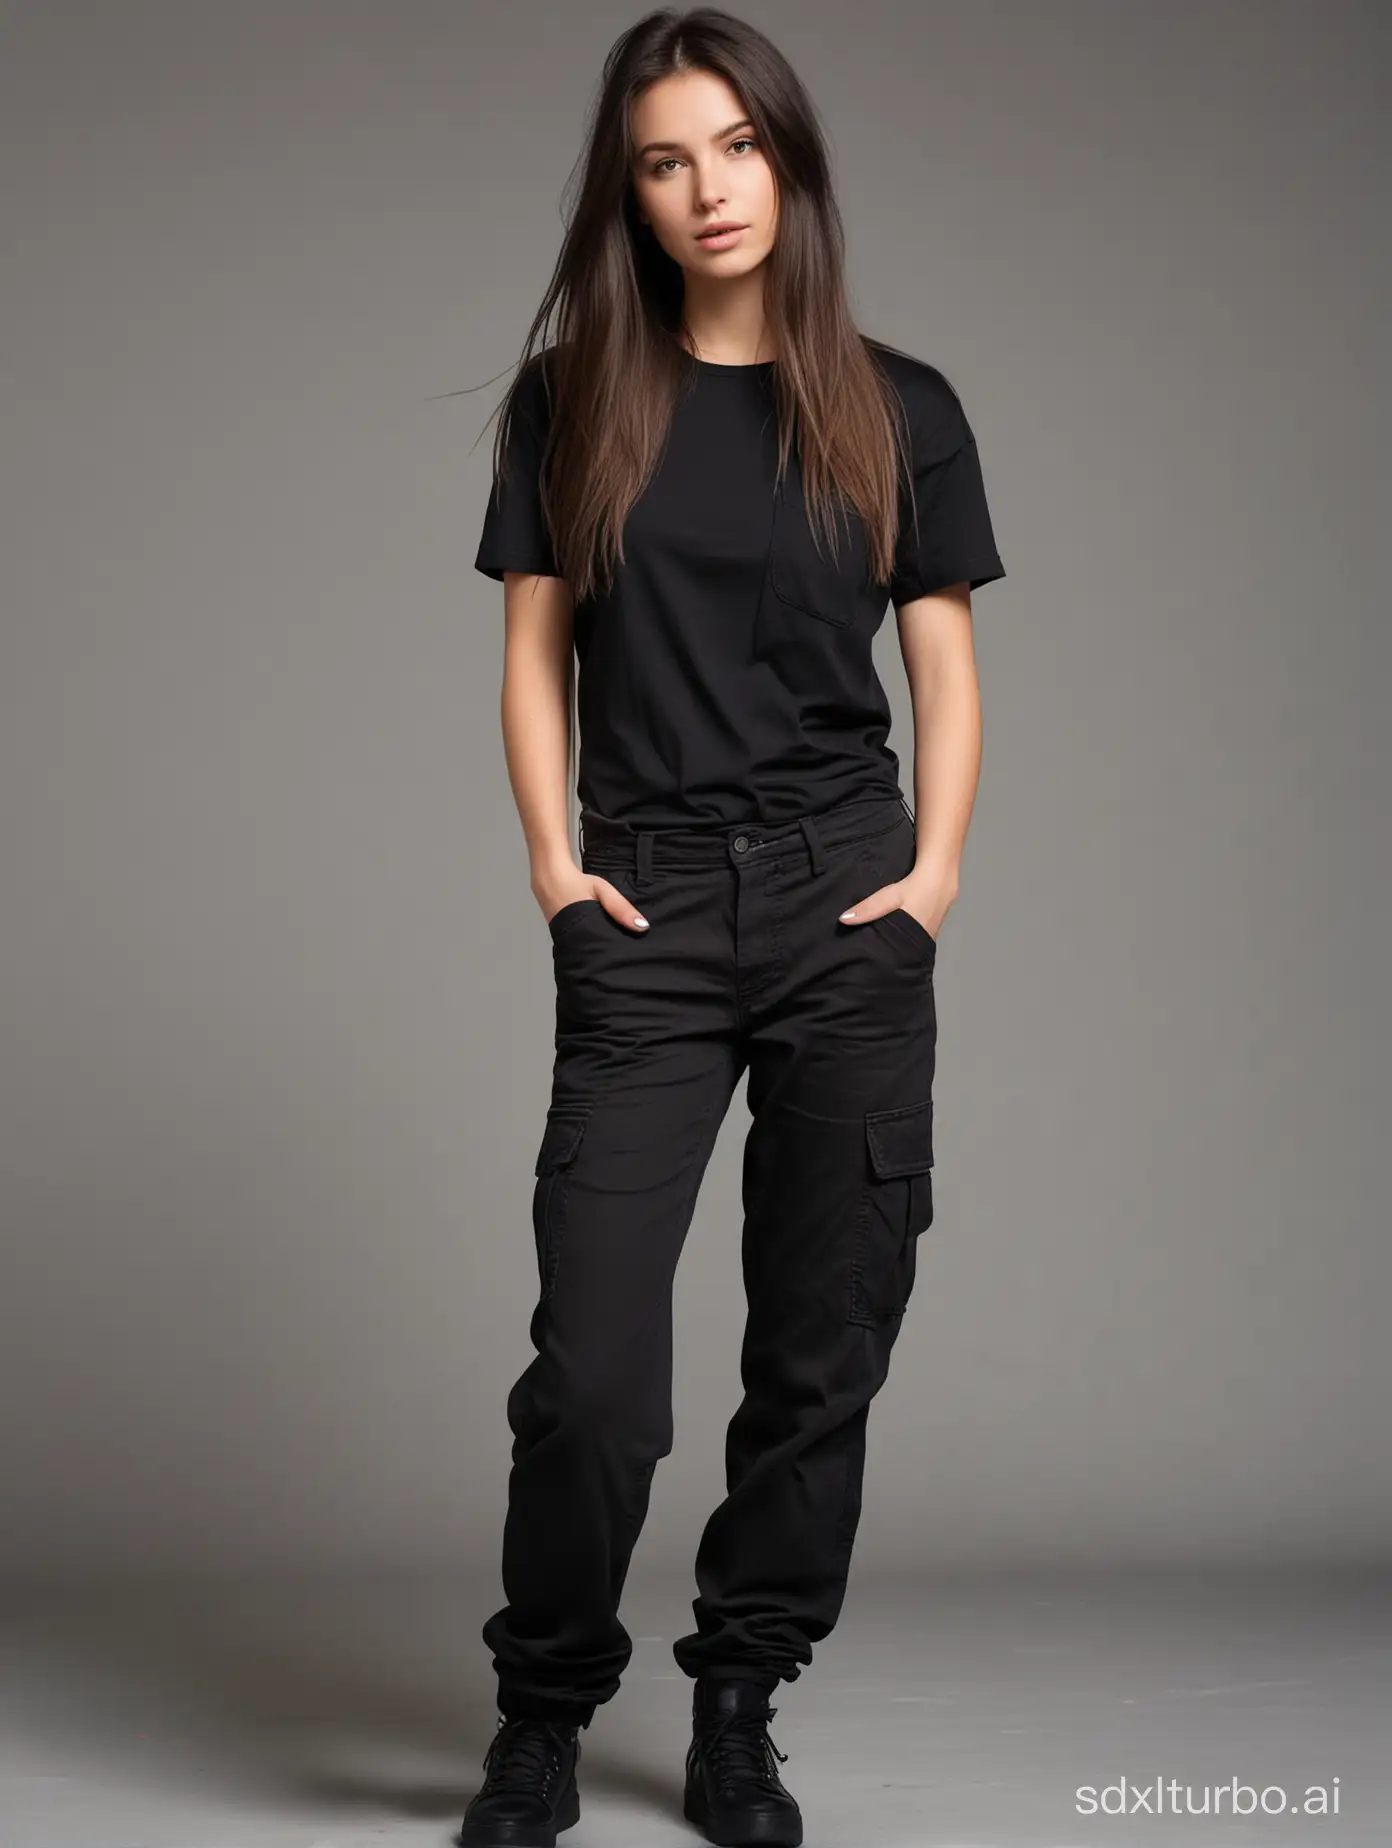 Polish-Girl-in-Stylish-Black-Outfit-with-Long-Straight-Hair